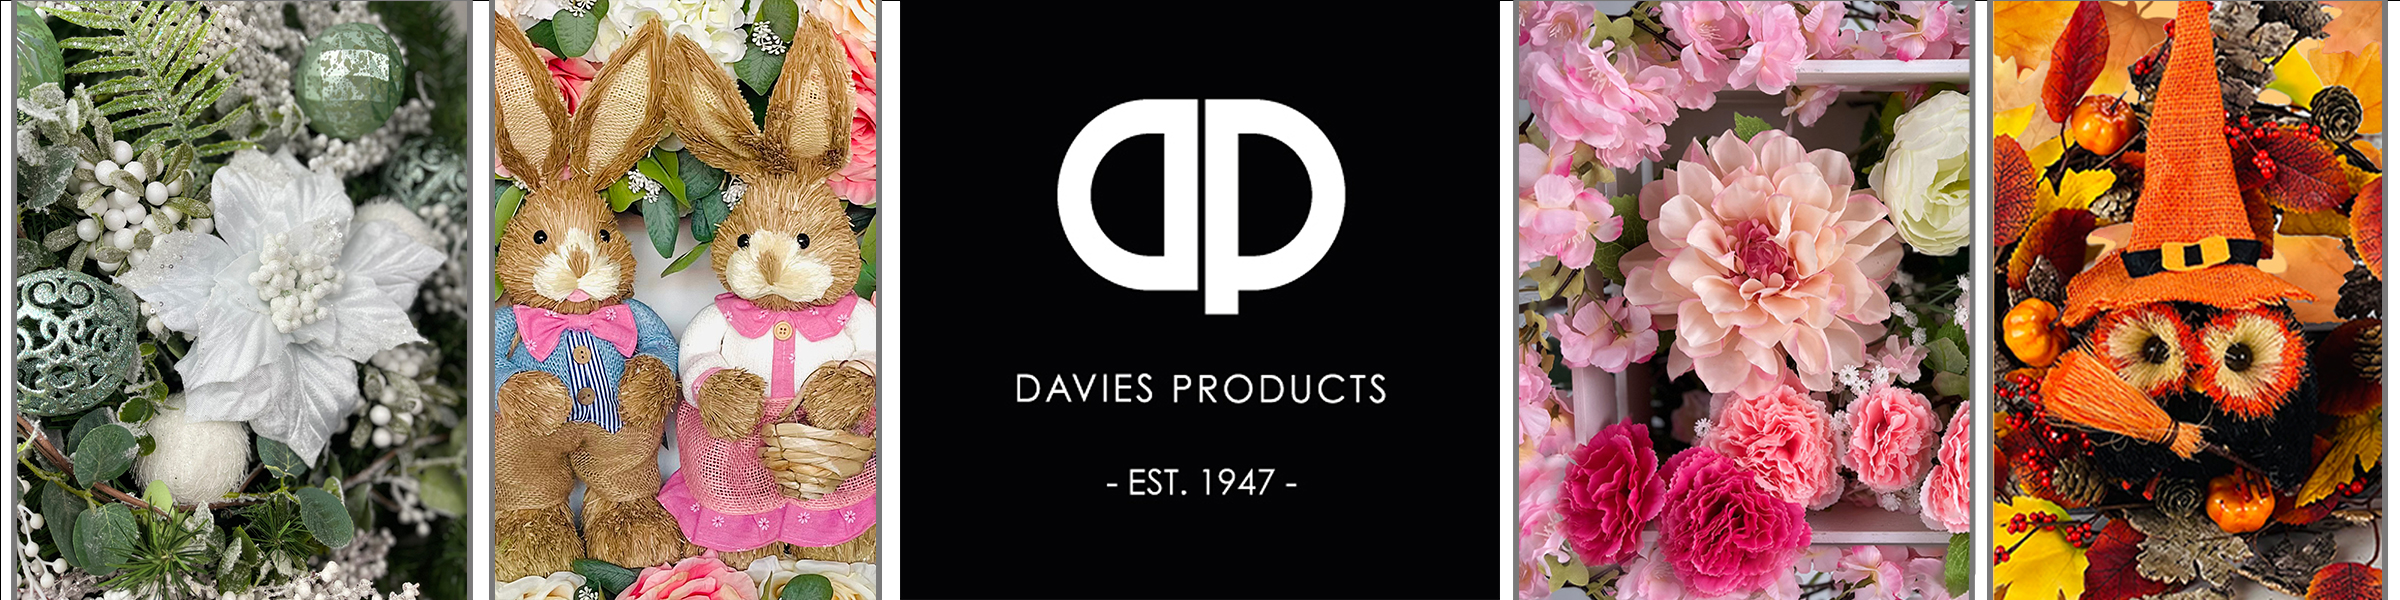 Davies Products